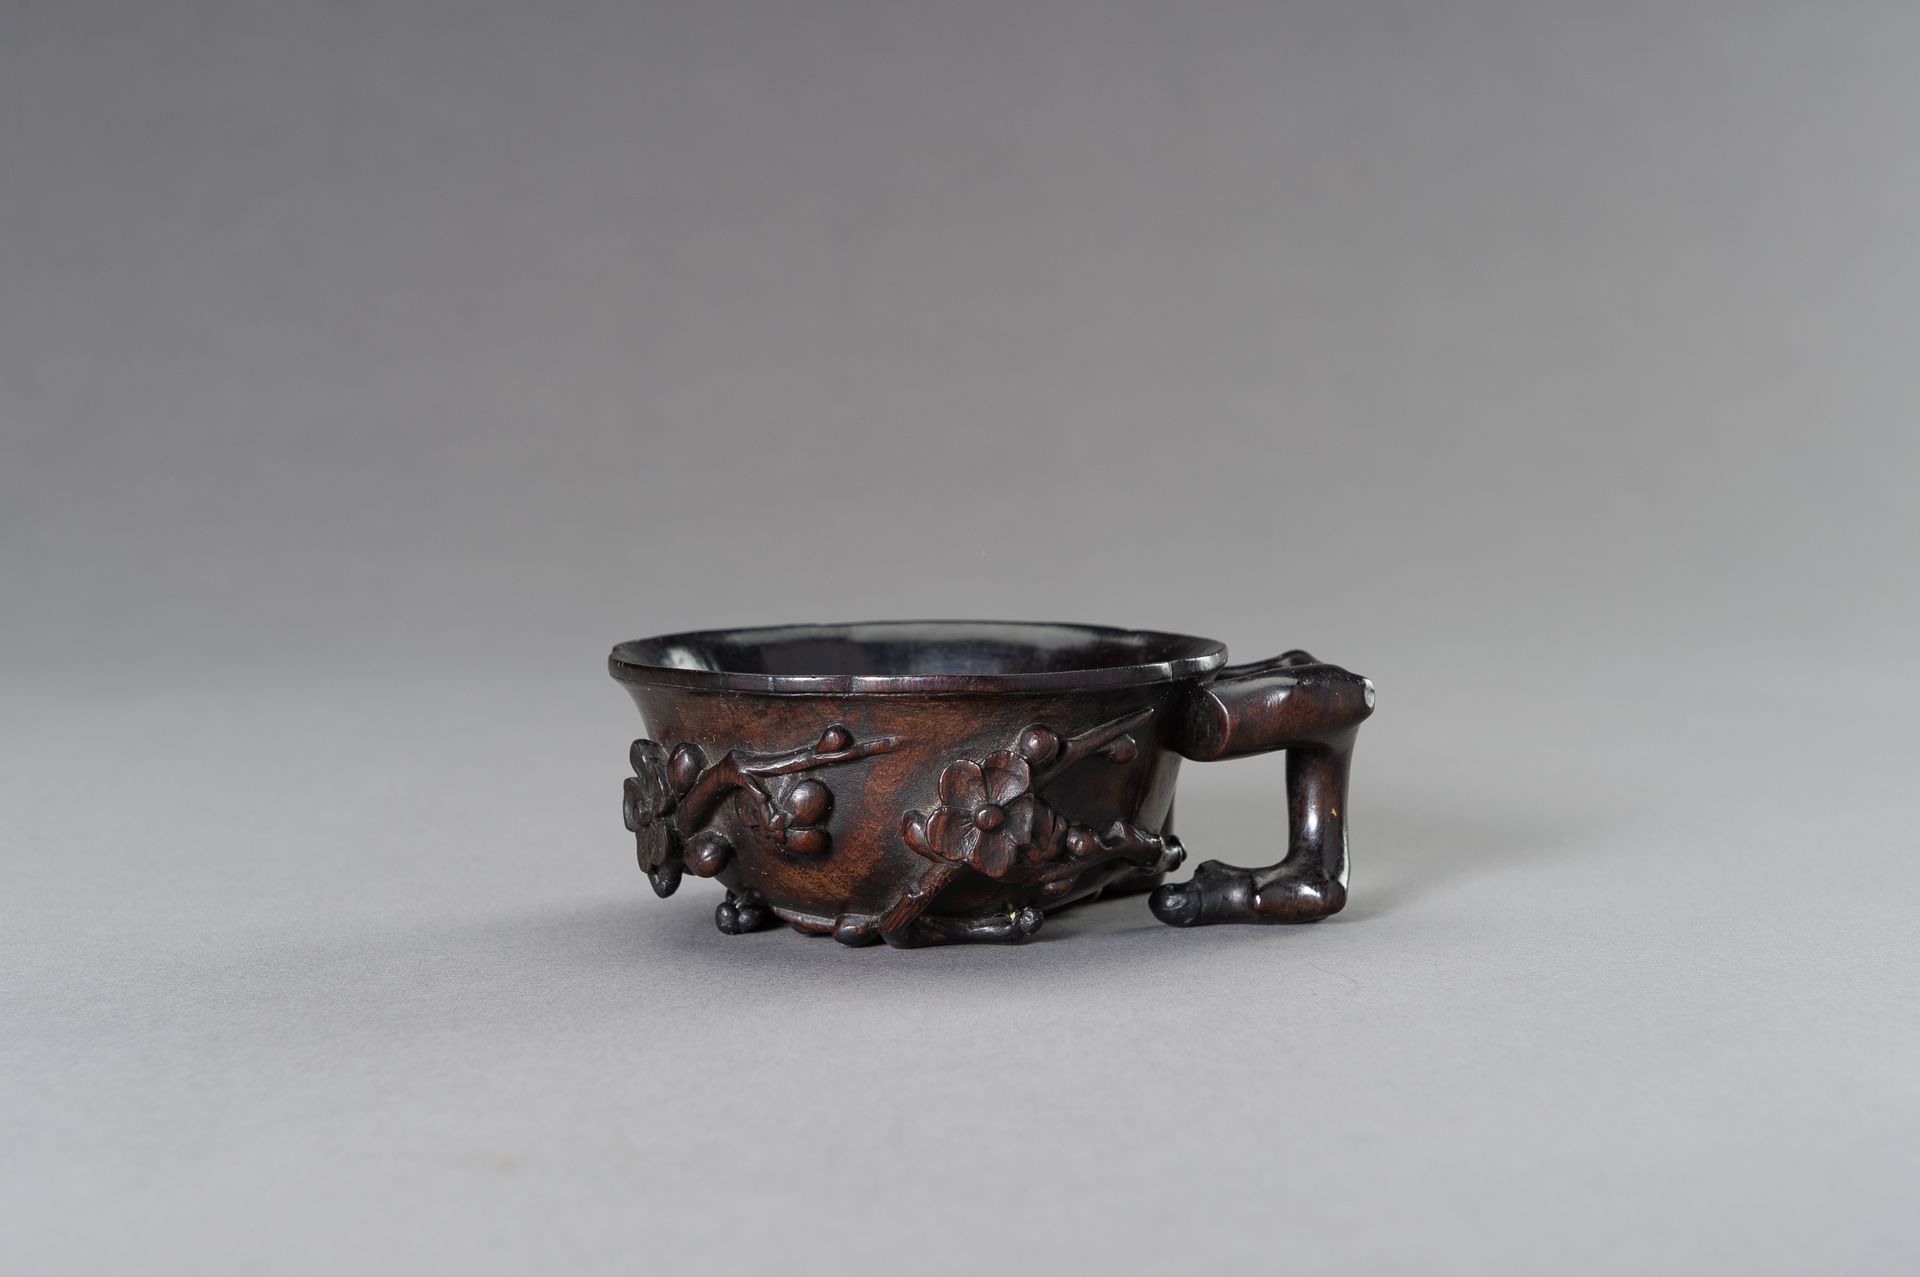 A WOOD 'PEACHES' LIBATION CUP A WOOD 'PEACHES' LIBATION CUP
China, Qing Dynasty &hellip;